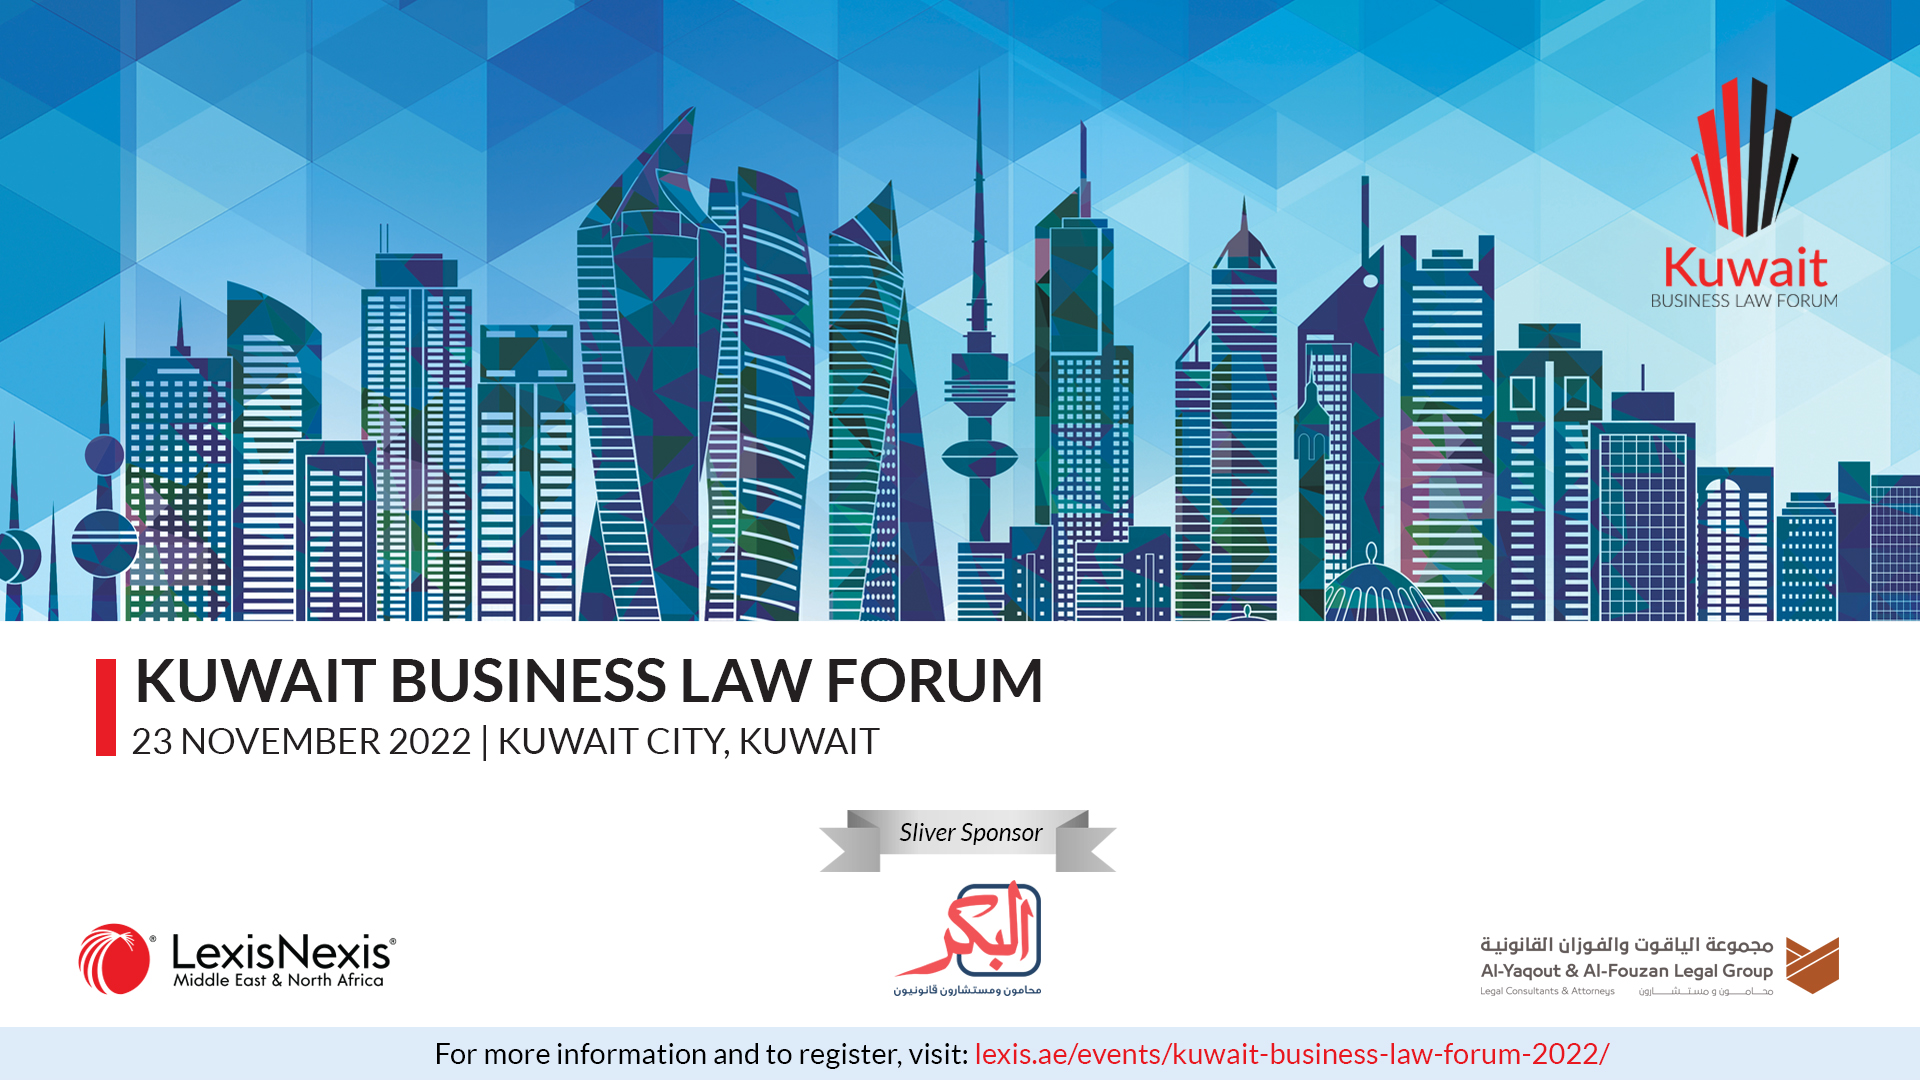 AlBaker & Associates Law Firm participates as a Silver Sponsor of the Kuwait Business Law Forum Conference 2022 – 6th Edition!